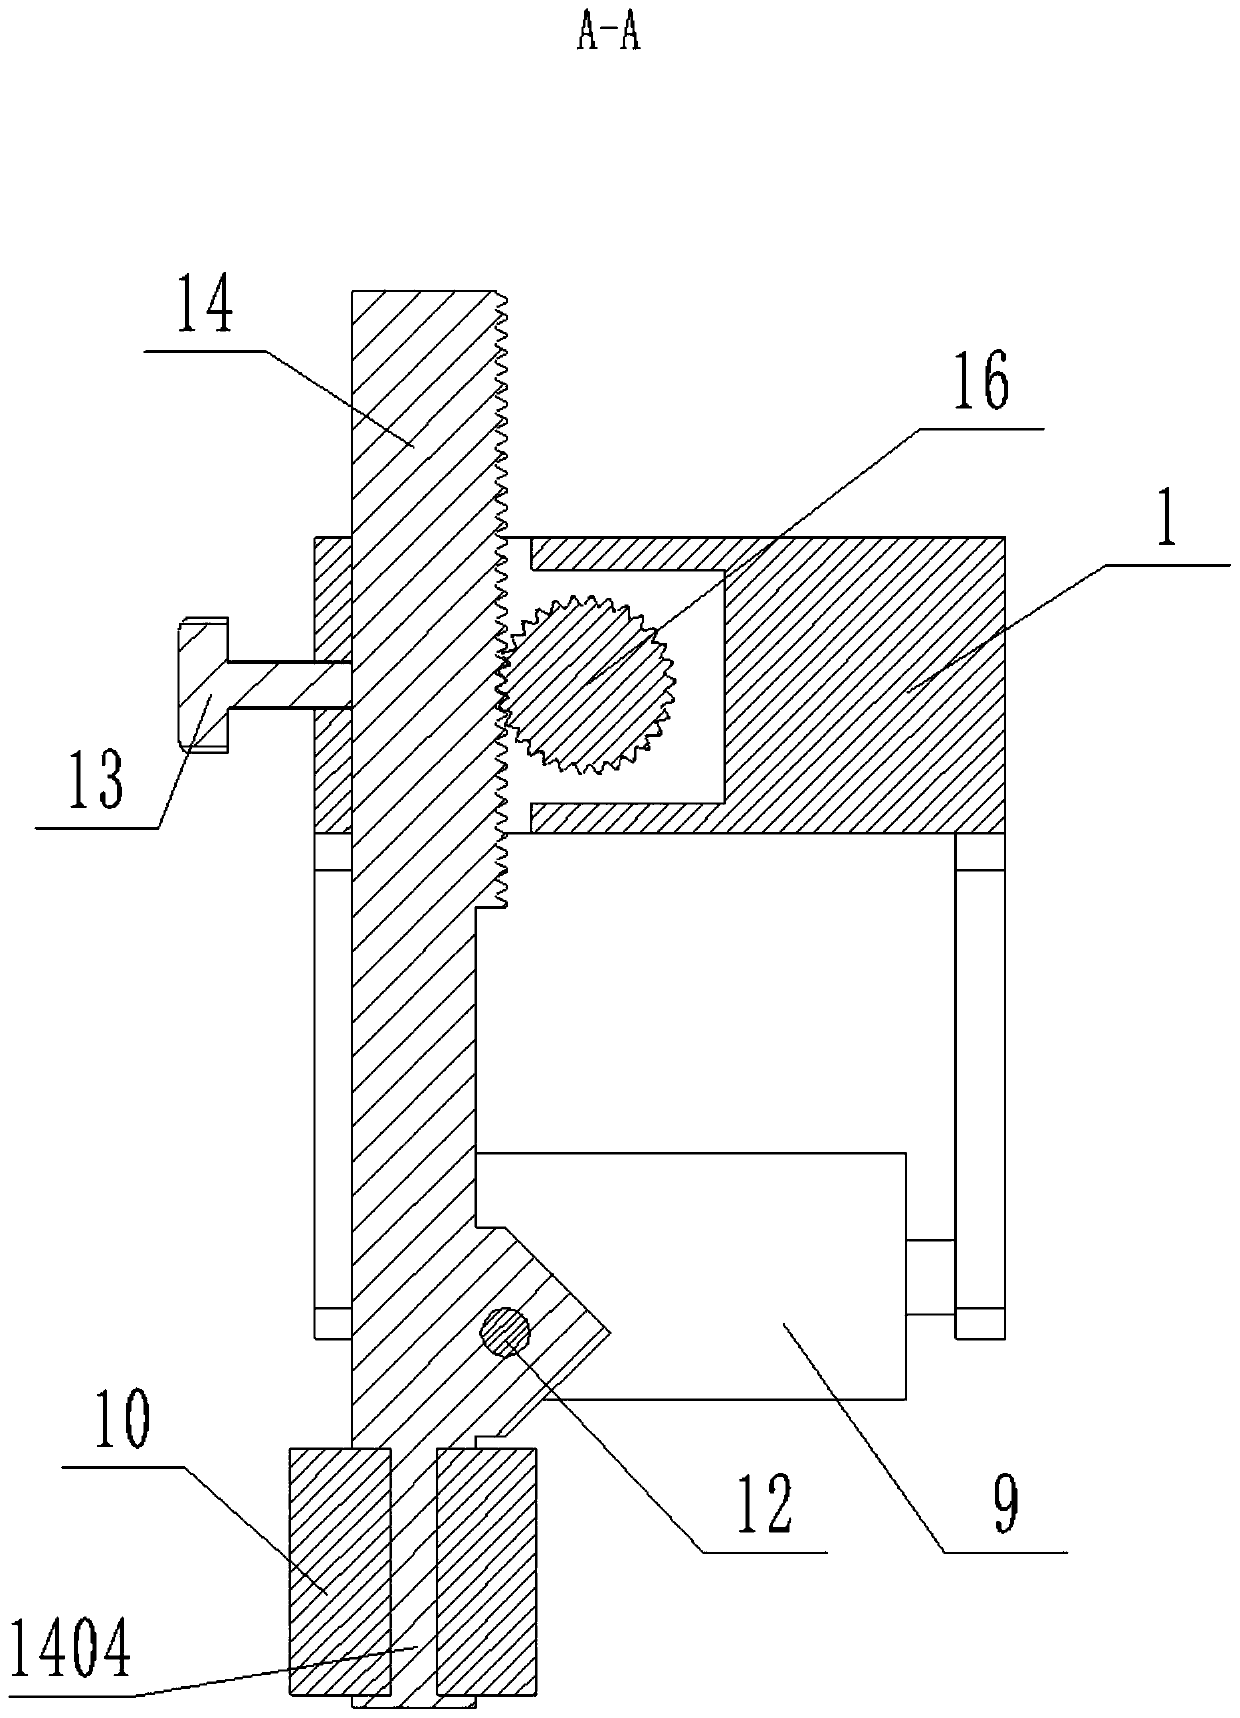 A deburring device capable of adjusting the size of the chamfer